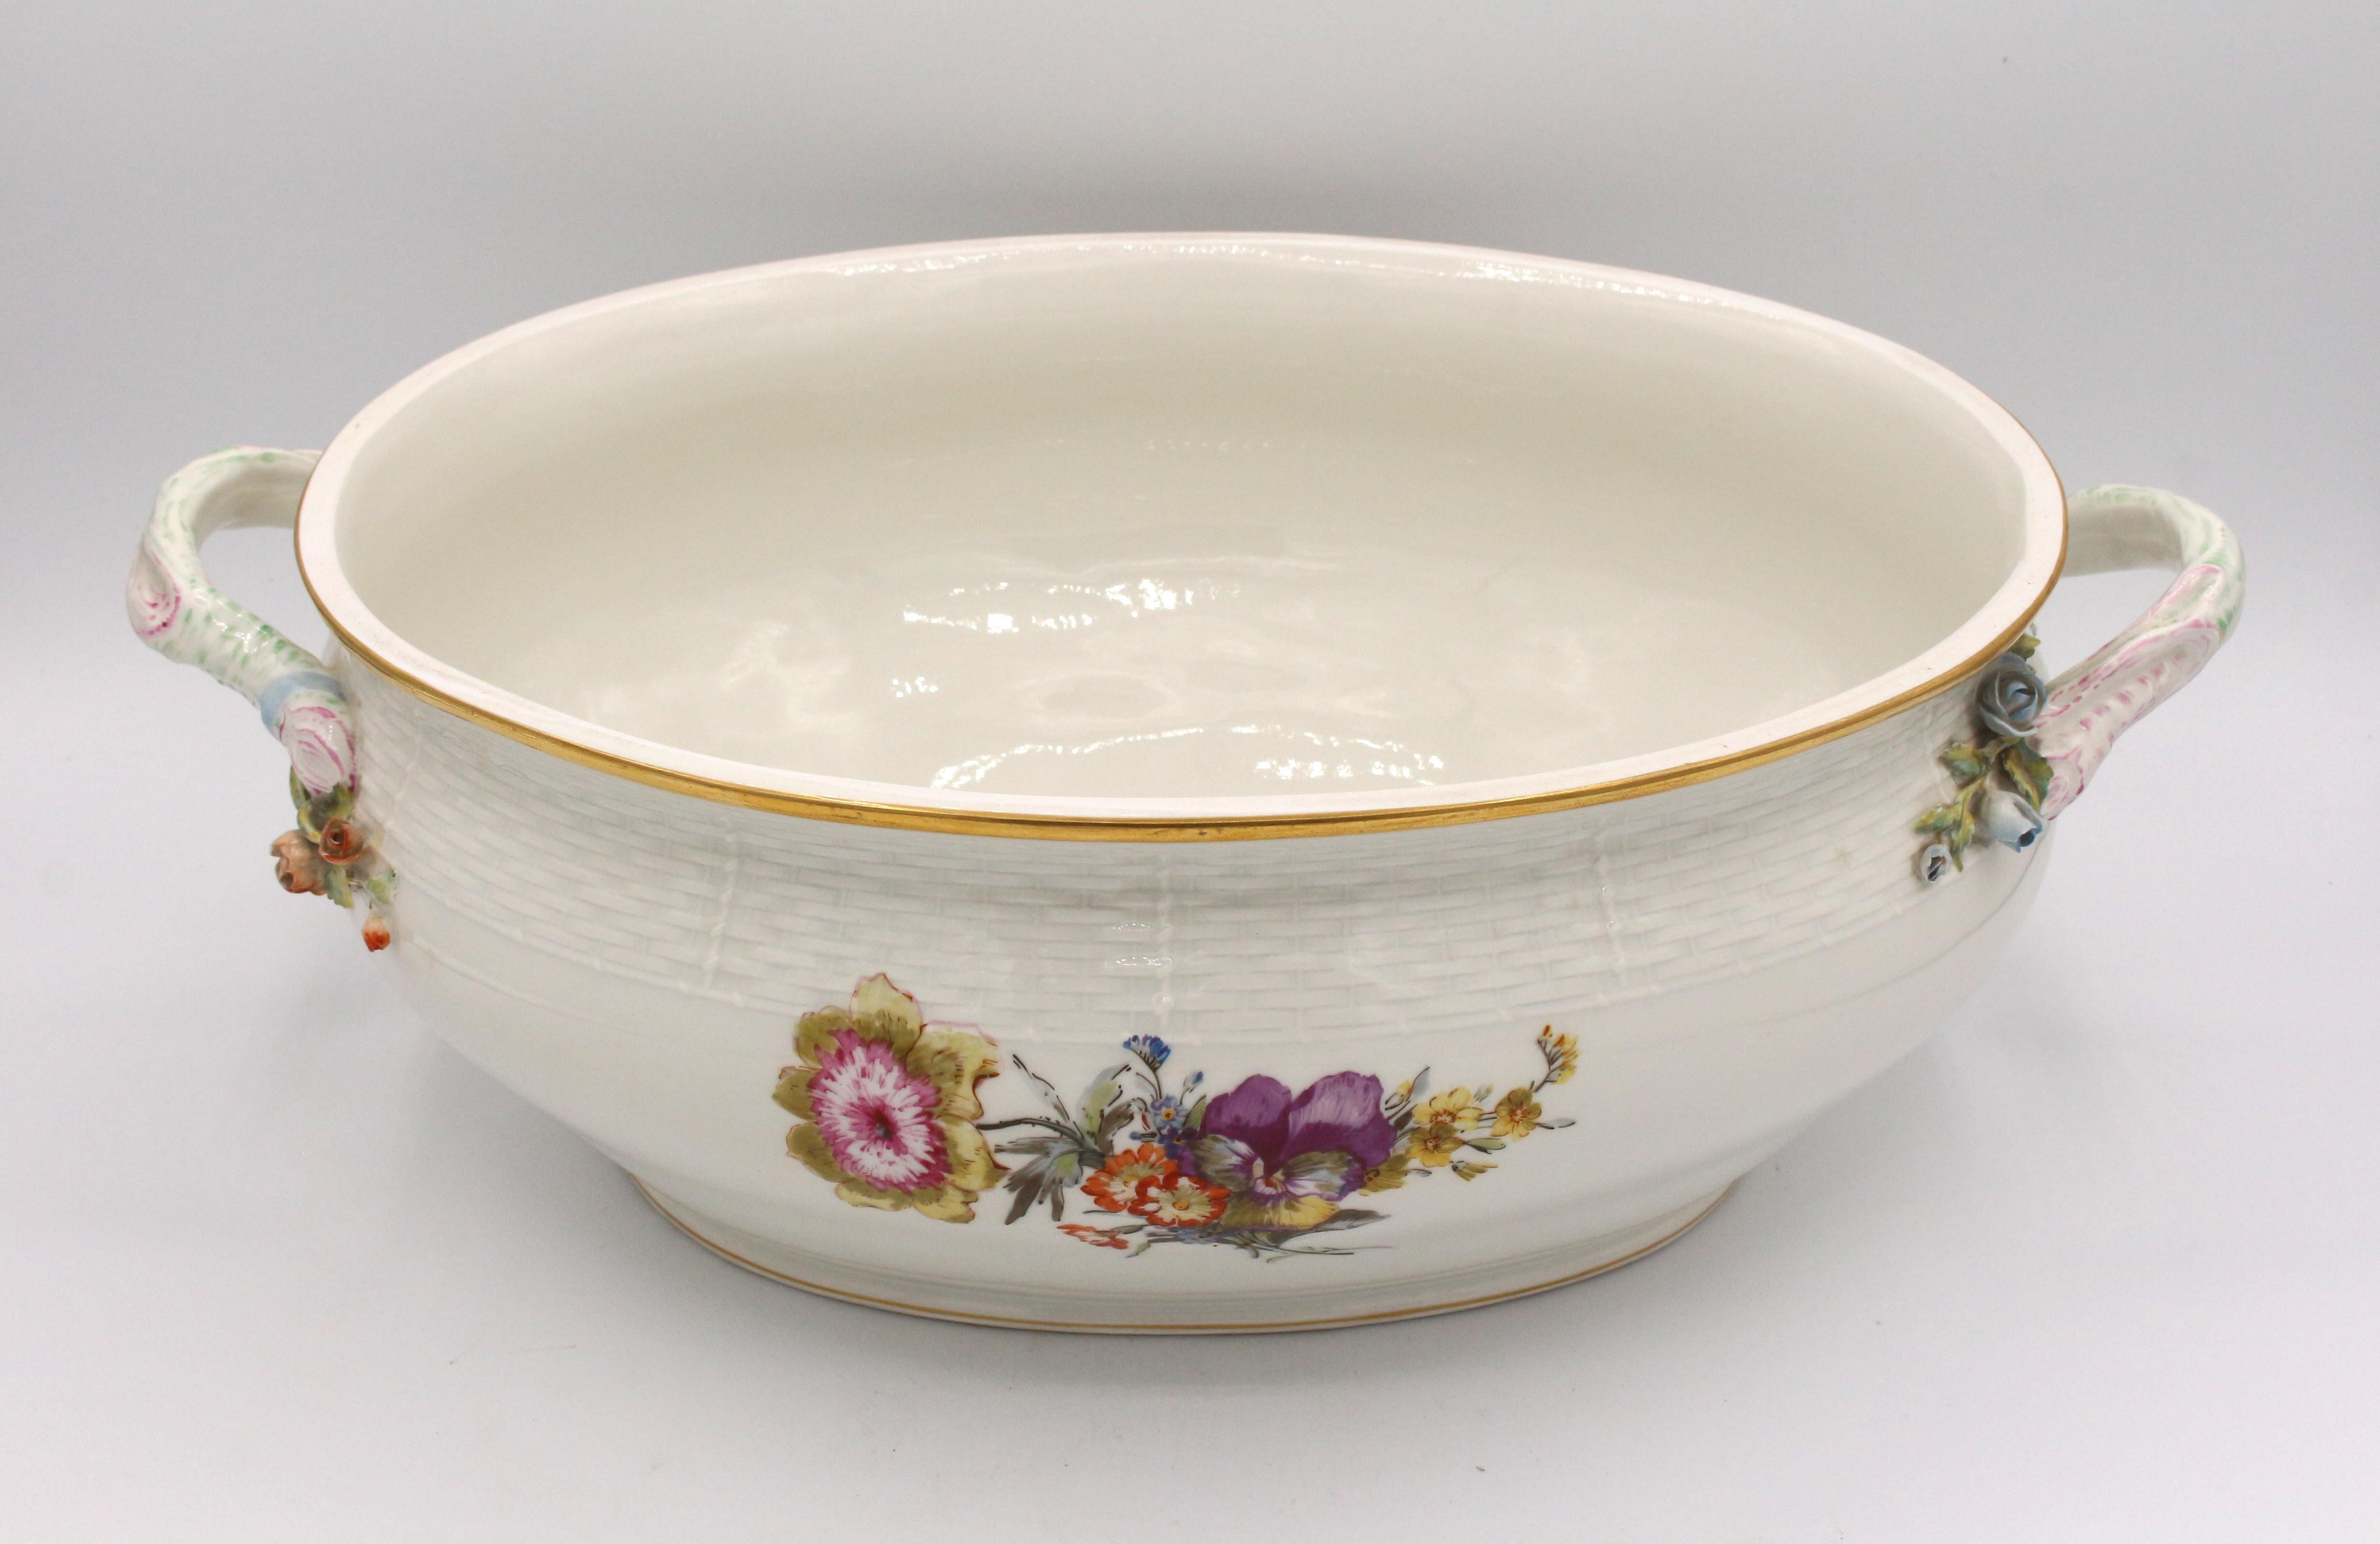 Late 19th Century Covered Porcelain Tureen by KPM In Good Condition For Sale In Chapel Hill, NC